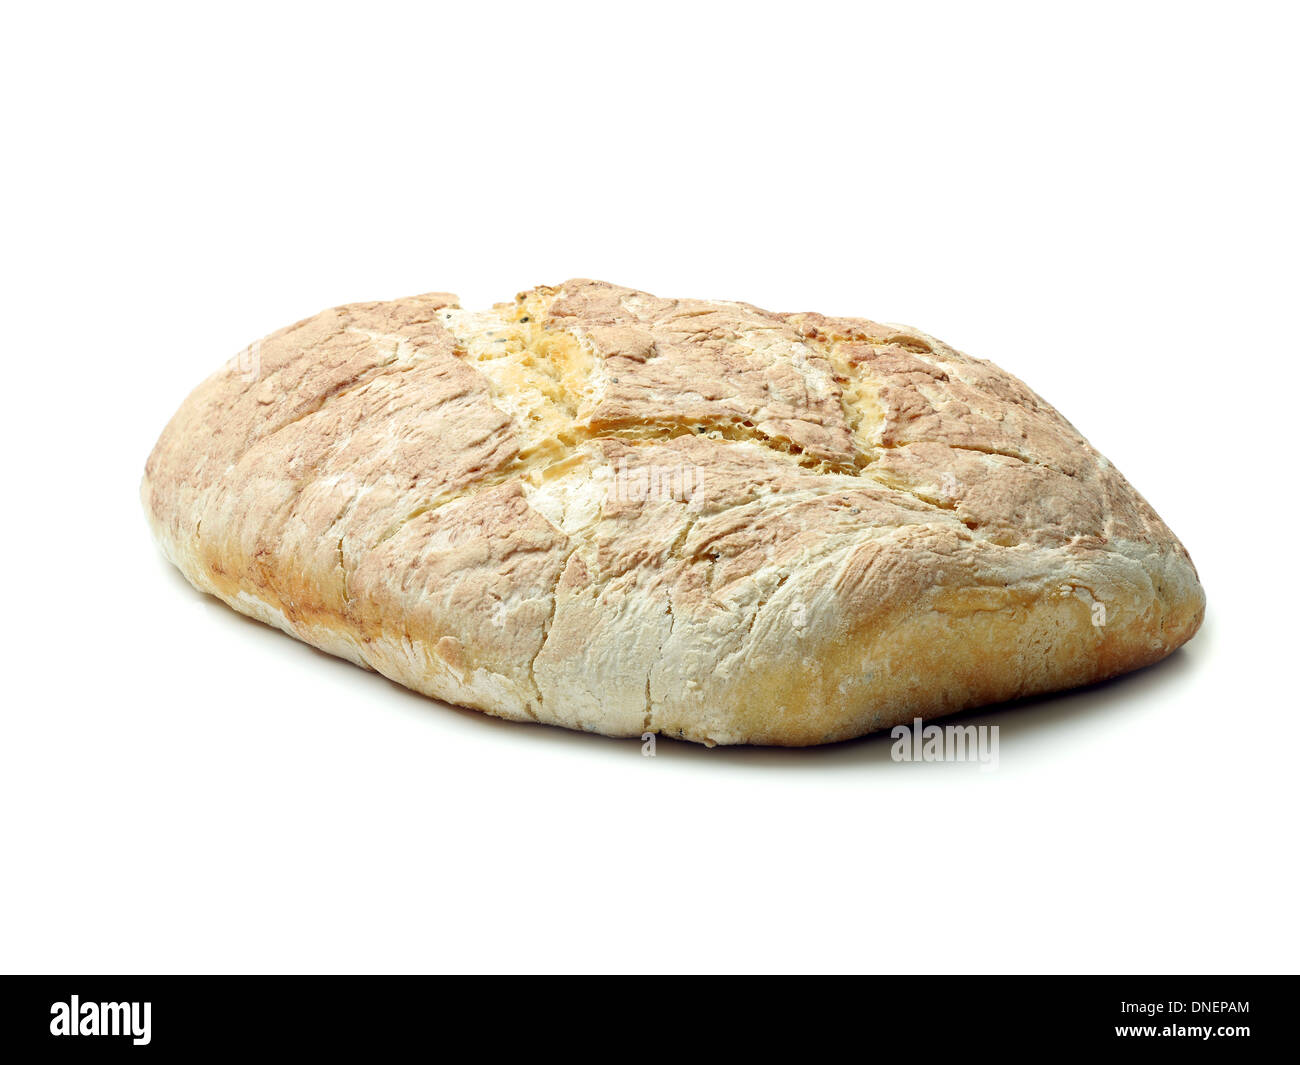 Loaf of home baked bread over white background Stock Photo